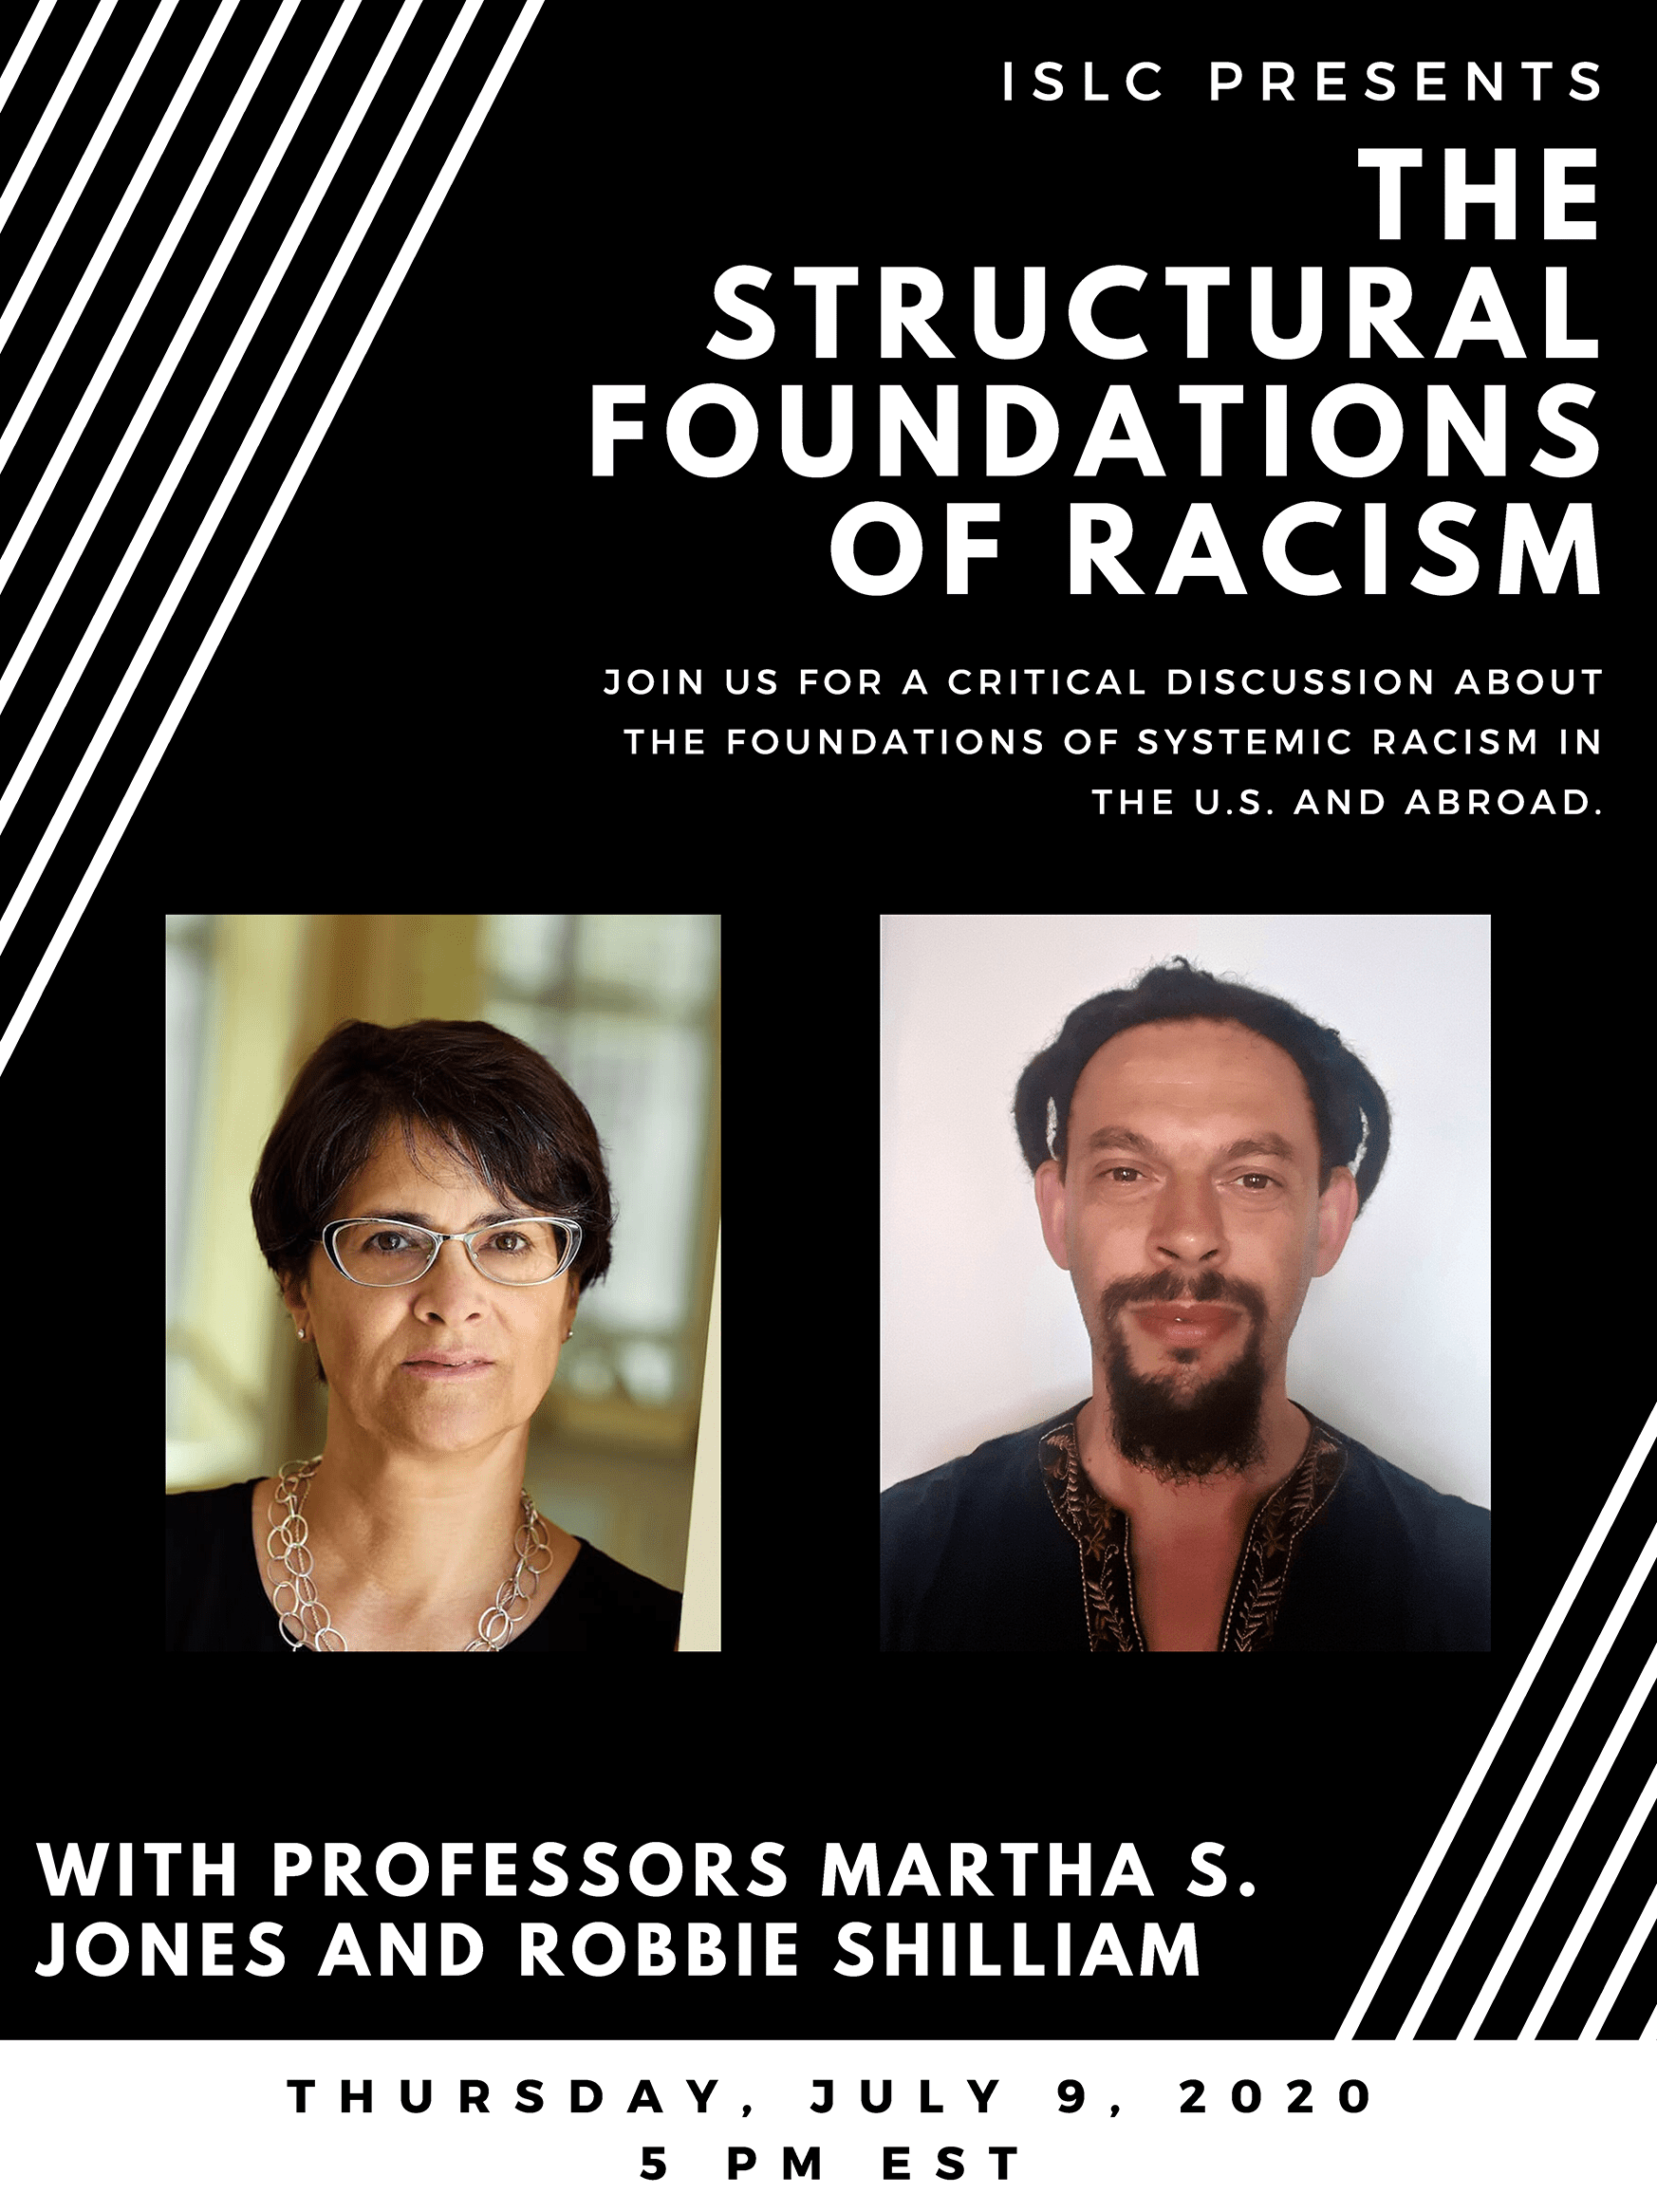 Summer Speaker Series on The Structural Foundations of Racism